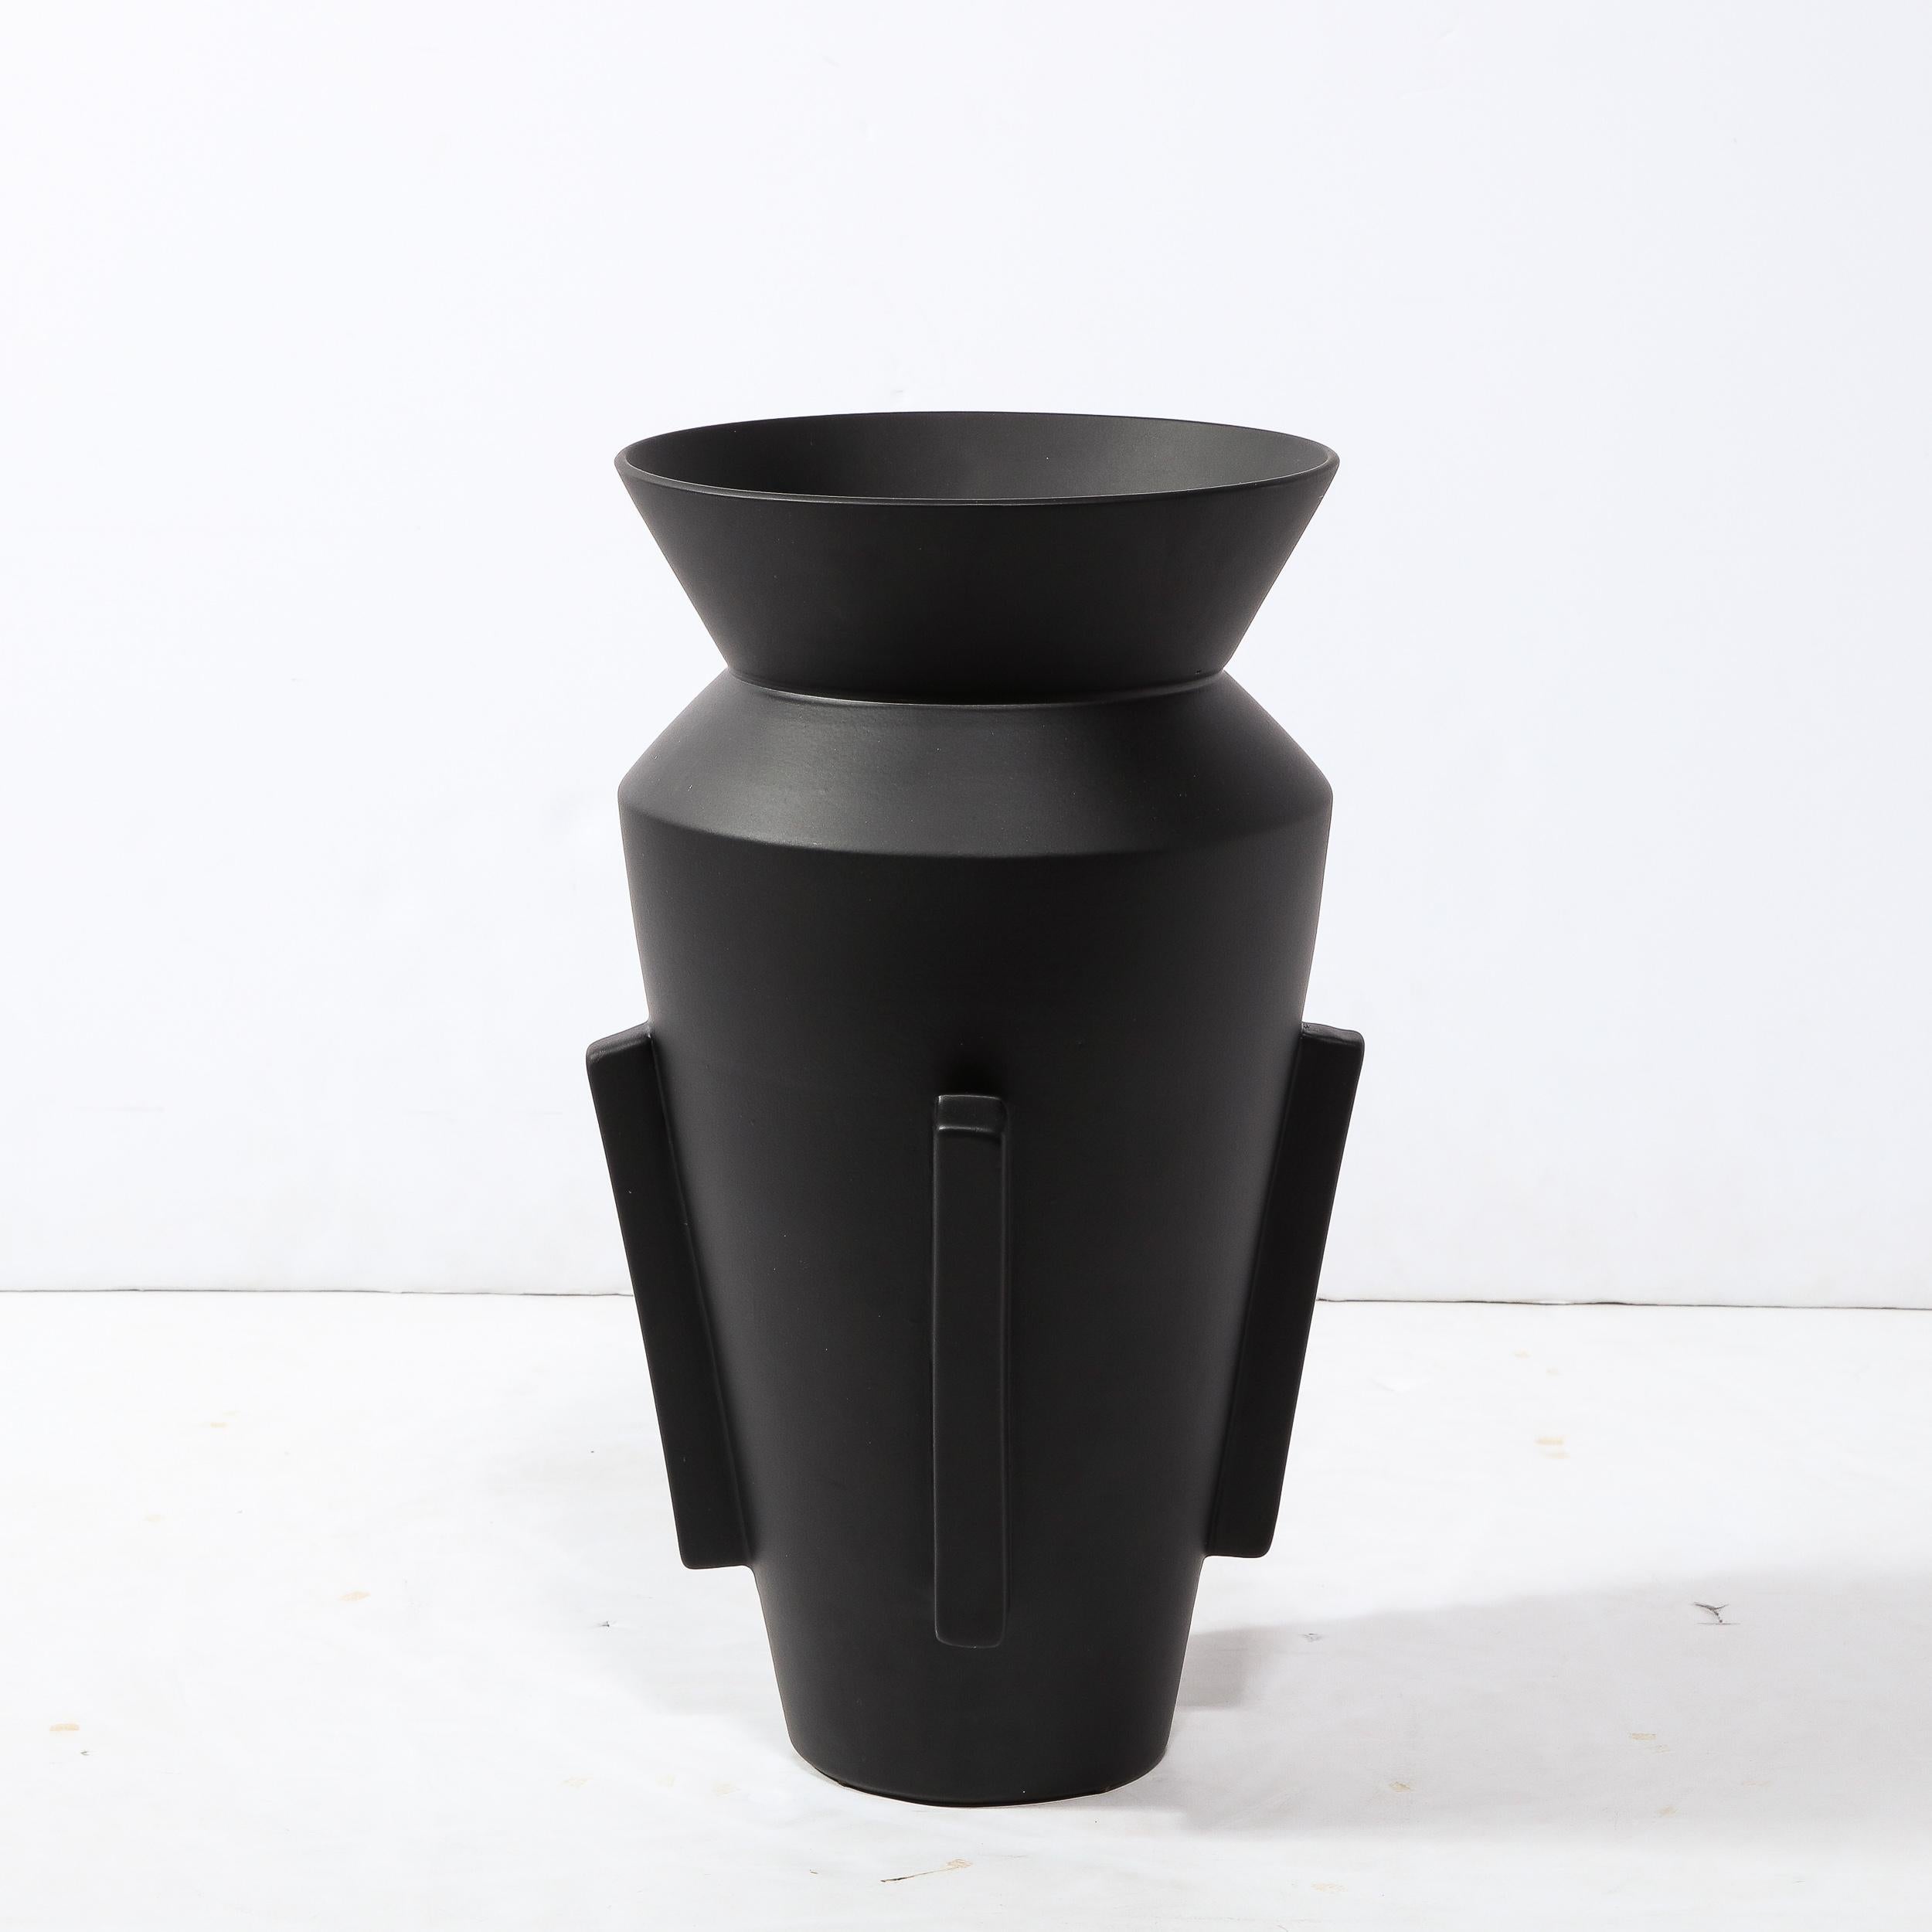 This refined and sophisticated modernist urn form vase was realized in the United States during the latter half of the 20th century. It features a conical body that flares to an hourglass collar and circular mouth. The sides of the piece offer